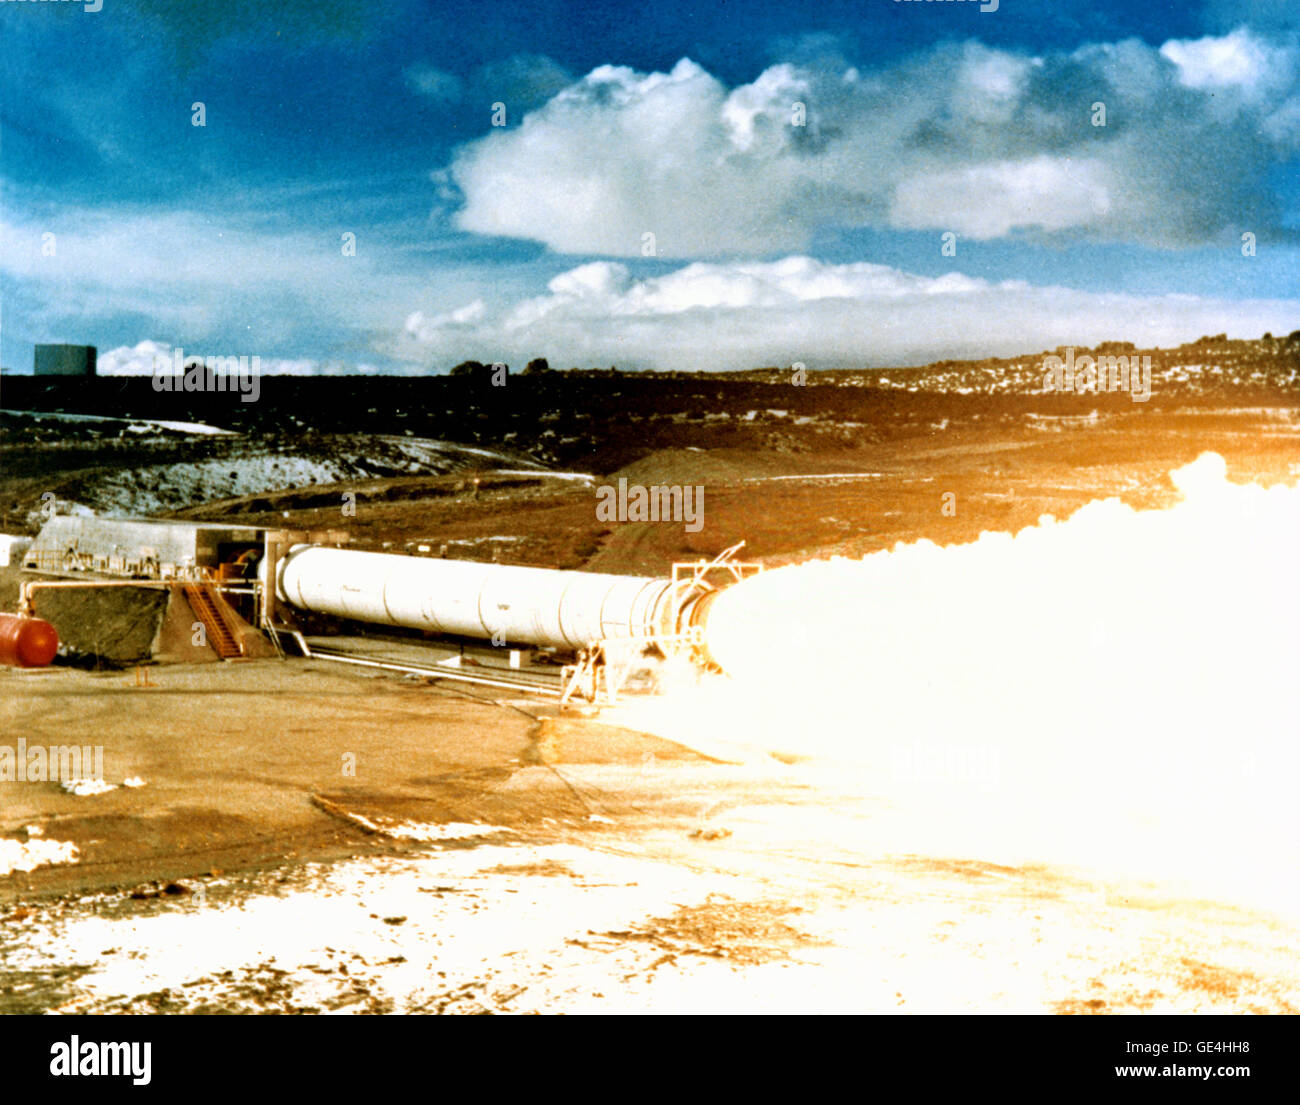 This photograph was taken during the static test firing of the DM-2 (Demonstration Motor) for the Solid Rocket Booster (SRB) at the testing ground of Thiokol Corporation near Brigham City, Utah. As one of the major components of the Space Shuttle, SRBs provide most of the power, their combined thrust of some 5.8 million pounds, for the first two minutes of flight. The SRBs took the Space Shuttle to an altitude of 28 miles and a speed of 3,094 miles per hour before they separated and fell back into the ocean to be retrieved, refurbished, and prepared for another flight. Marshall Space Flight Ce Stock Photo